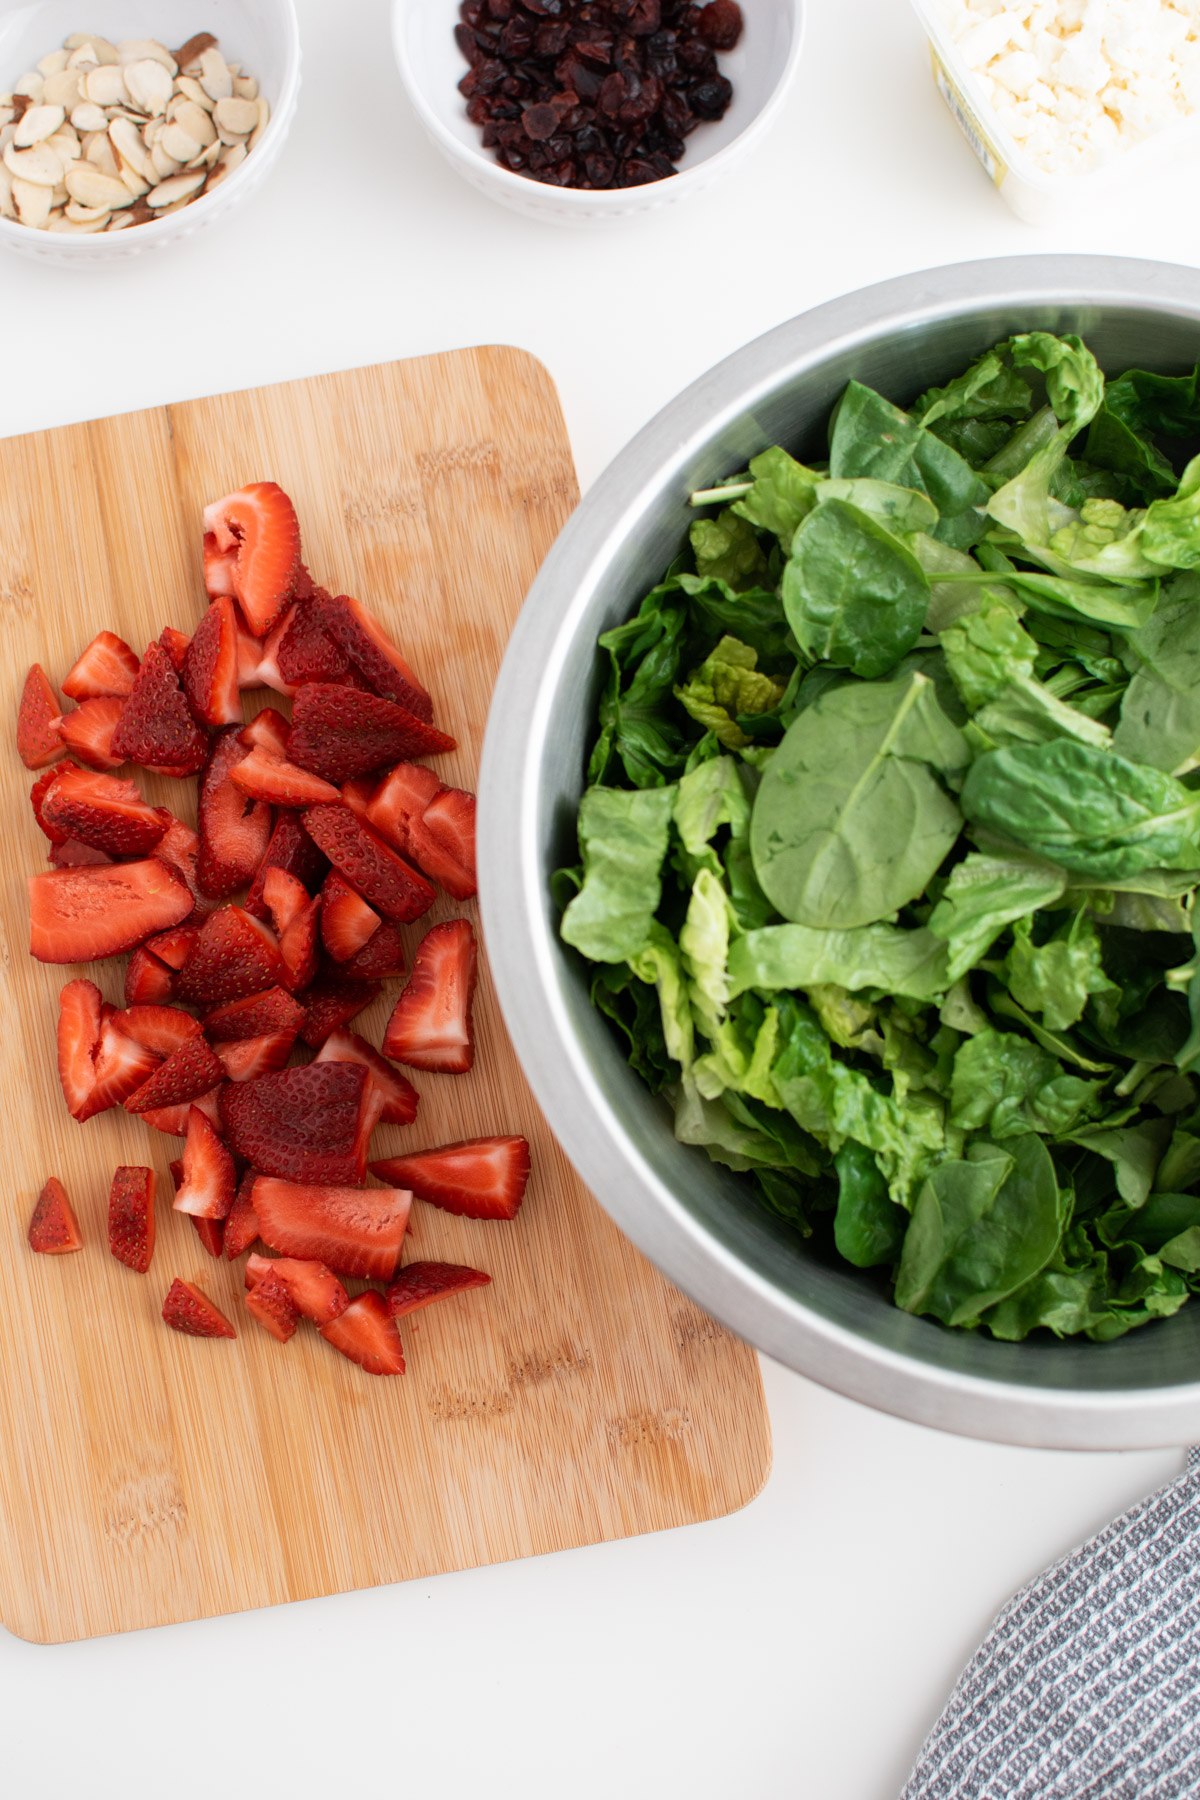 Chopped strawberries on wooden cutting board next to mixing bowl filled with lettuce and spinach.